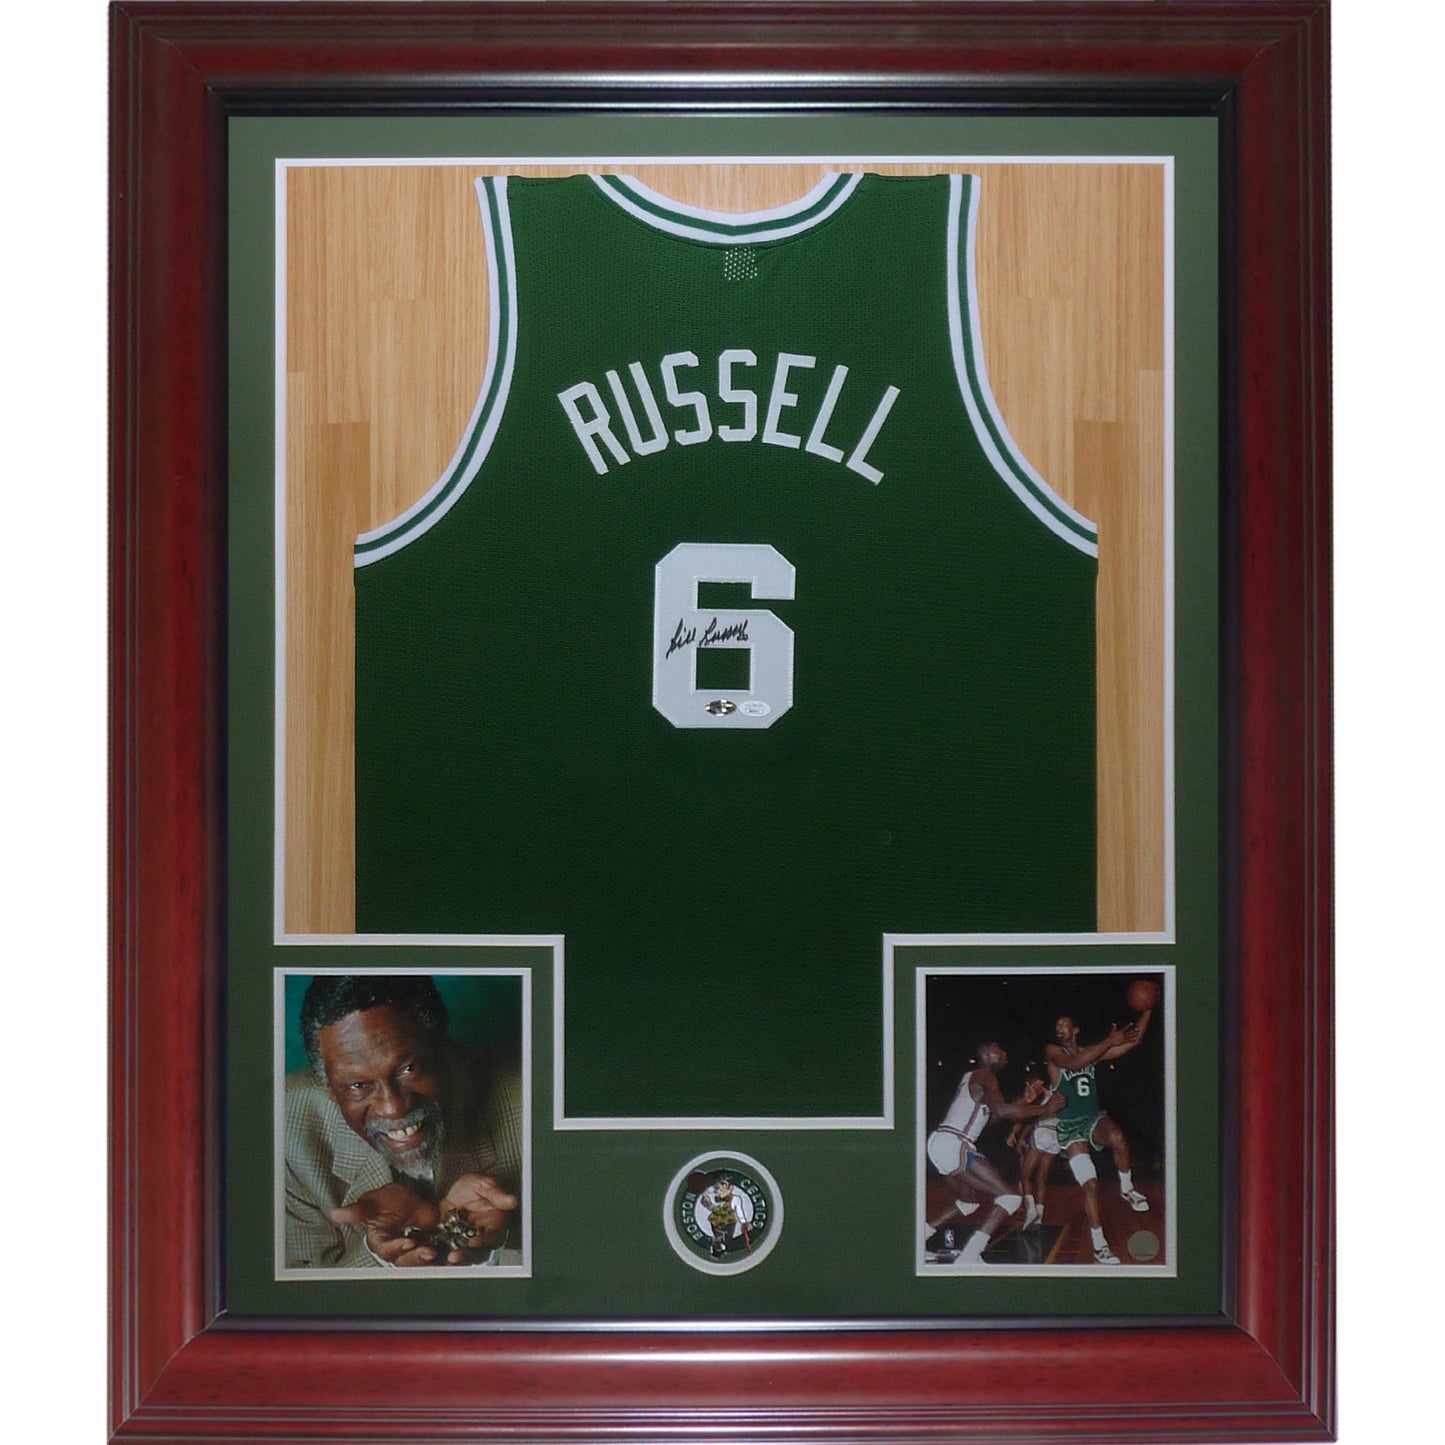 Bill Russell Autographed Boston Signed Authentic Green Basketball Jers